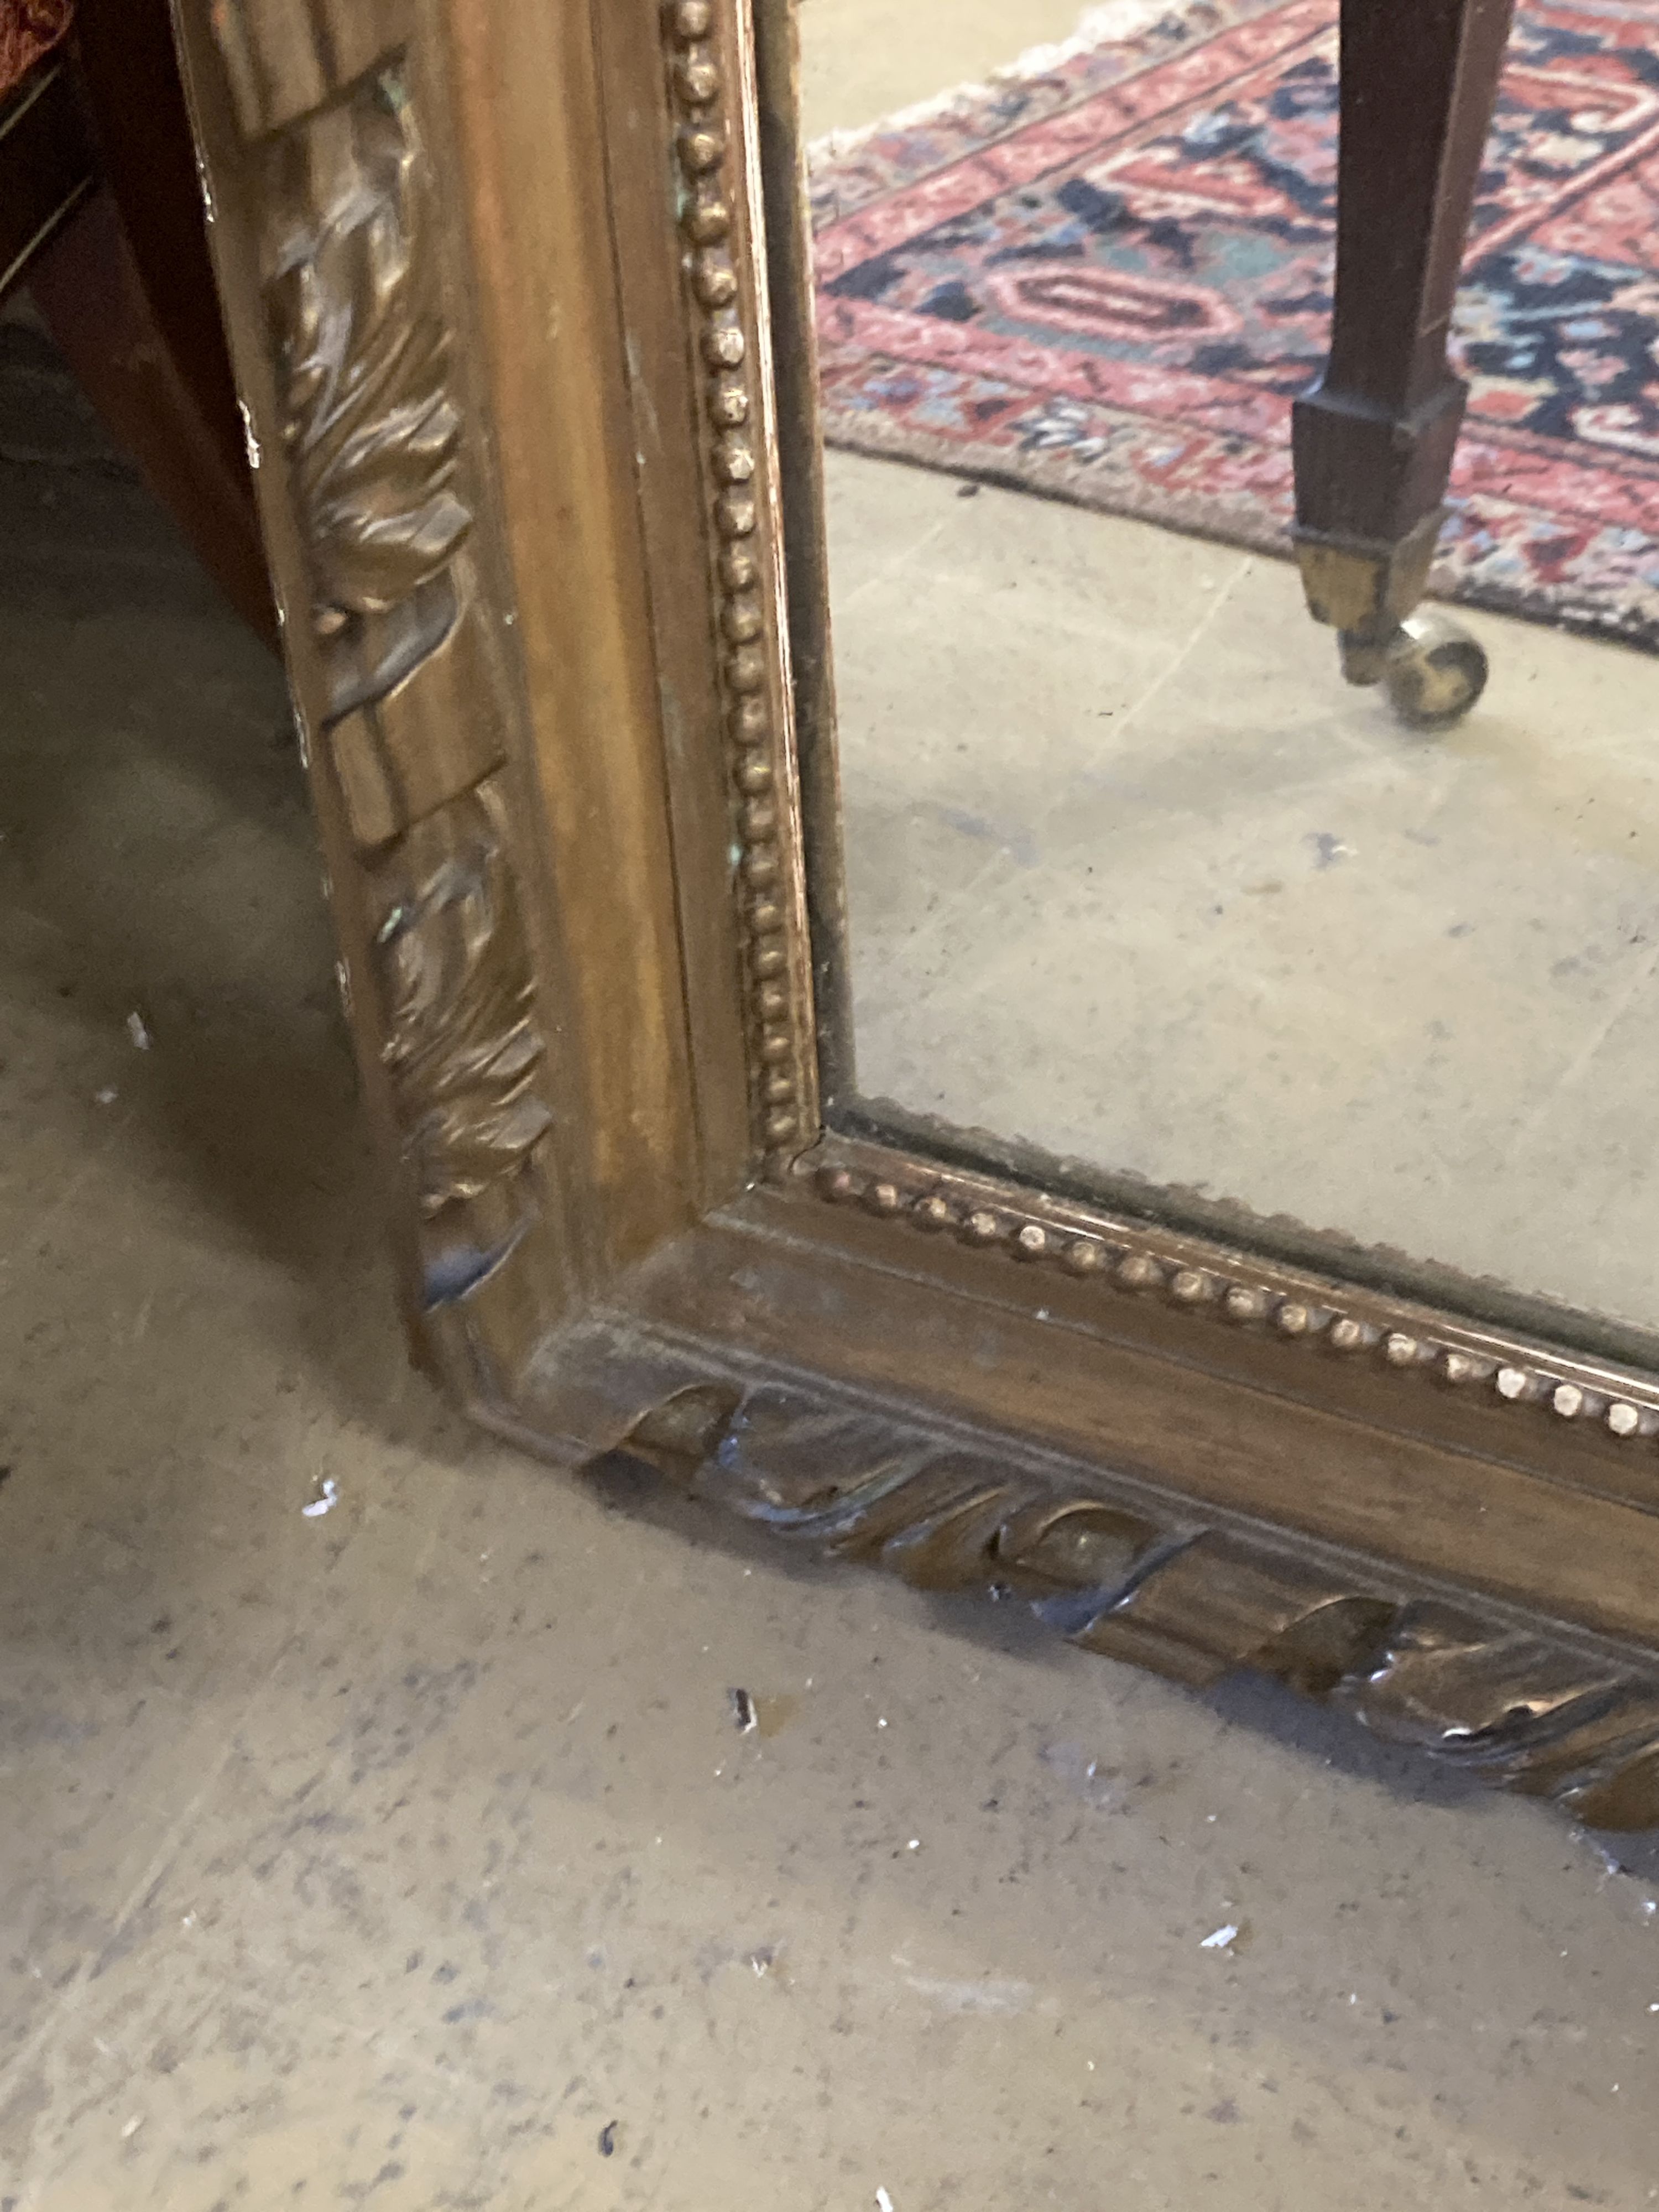 A Victorian arched giltwood overmantel mirror, width 80cm, height 118cm